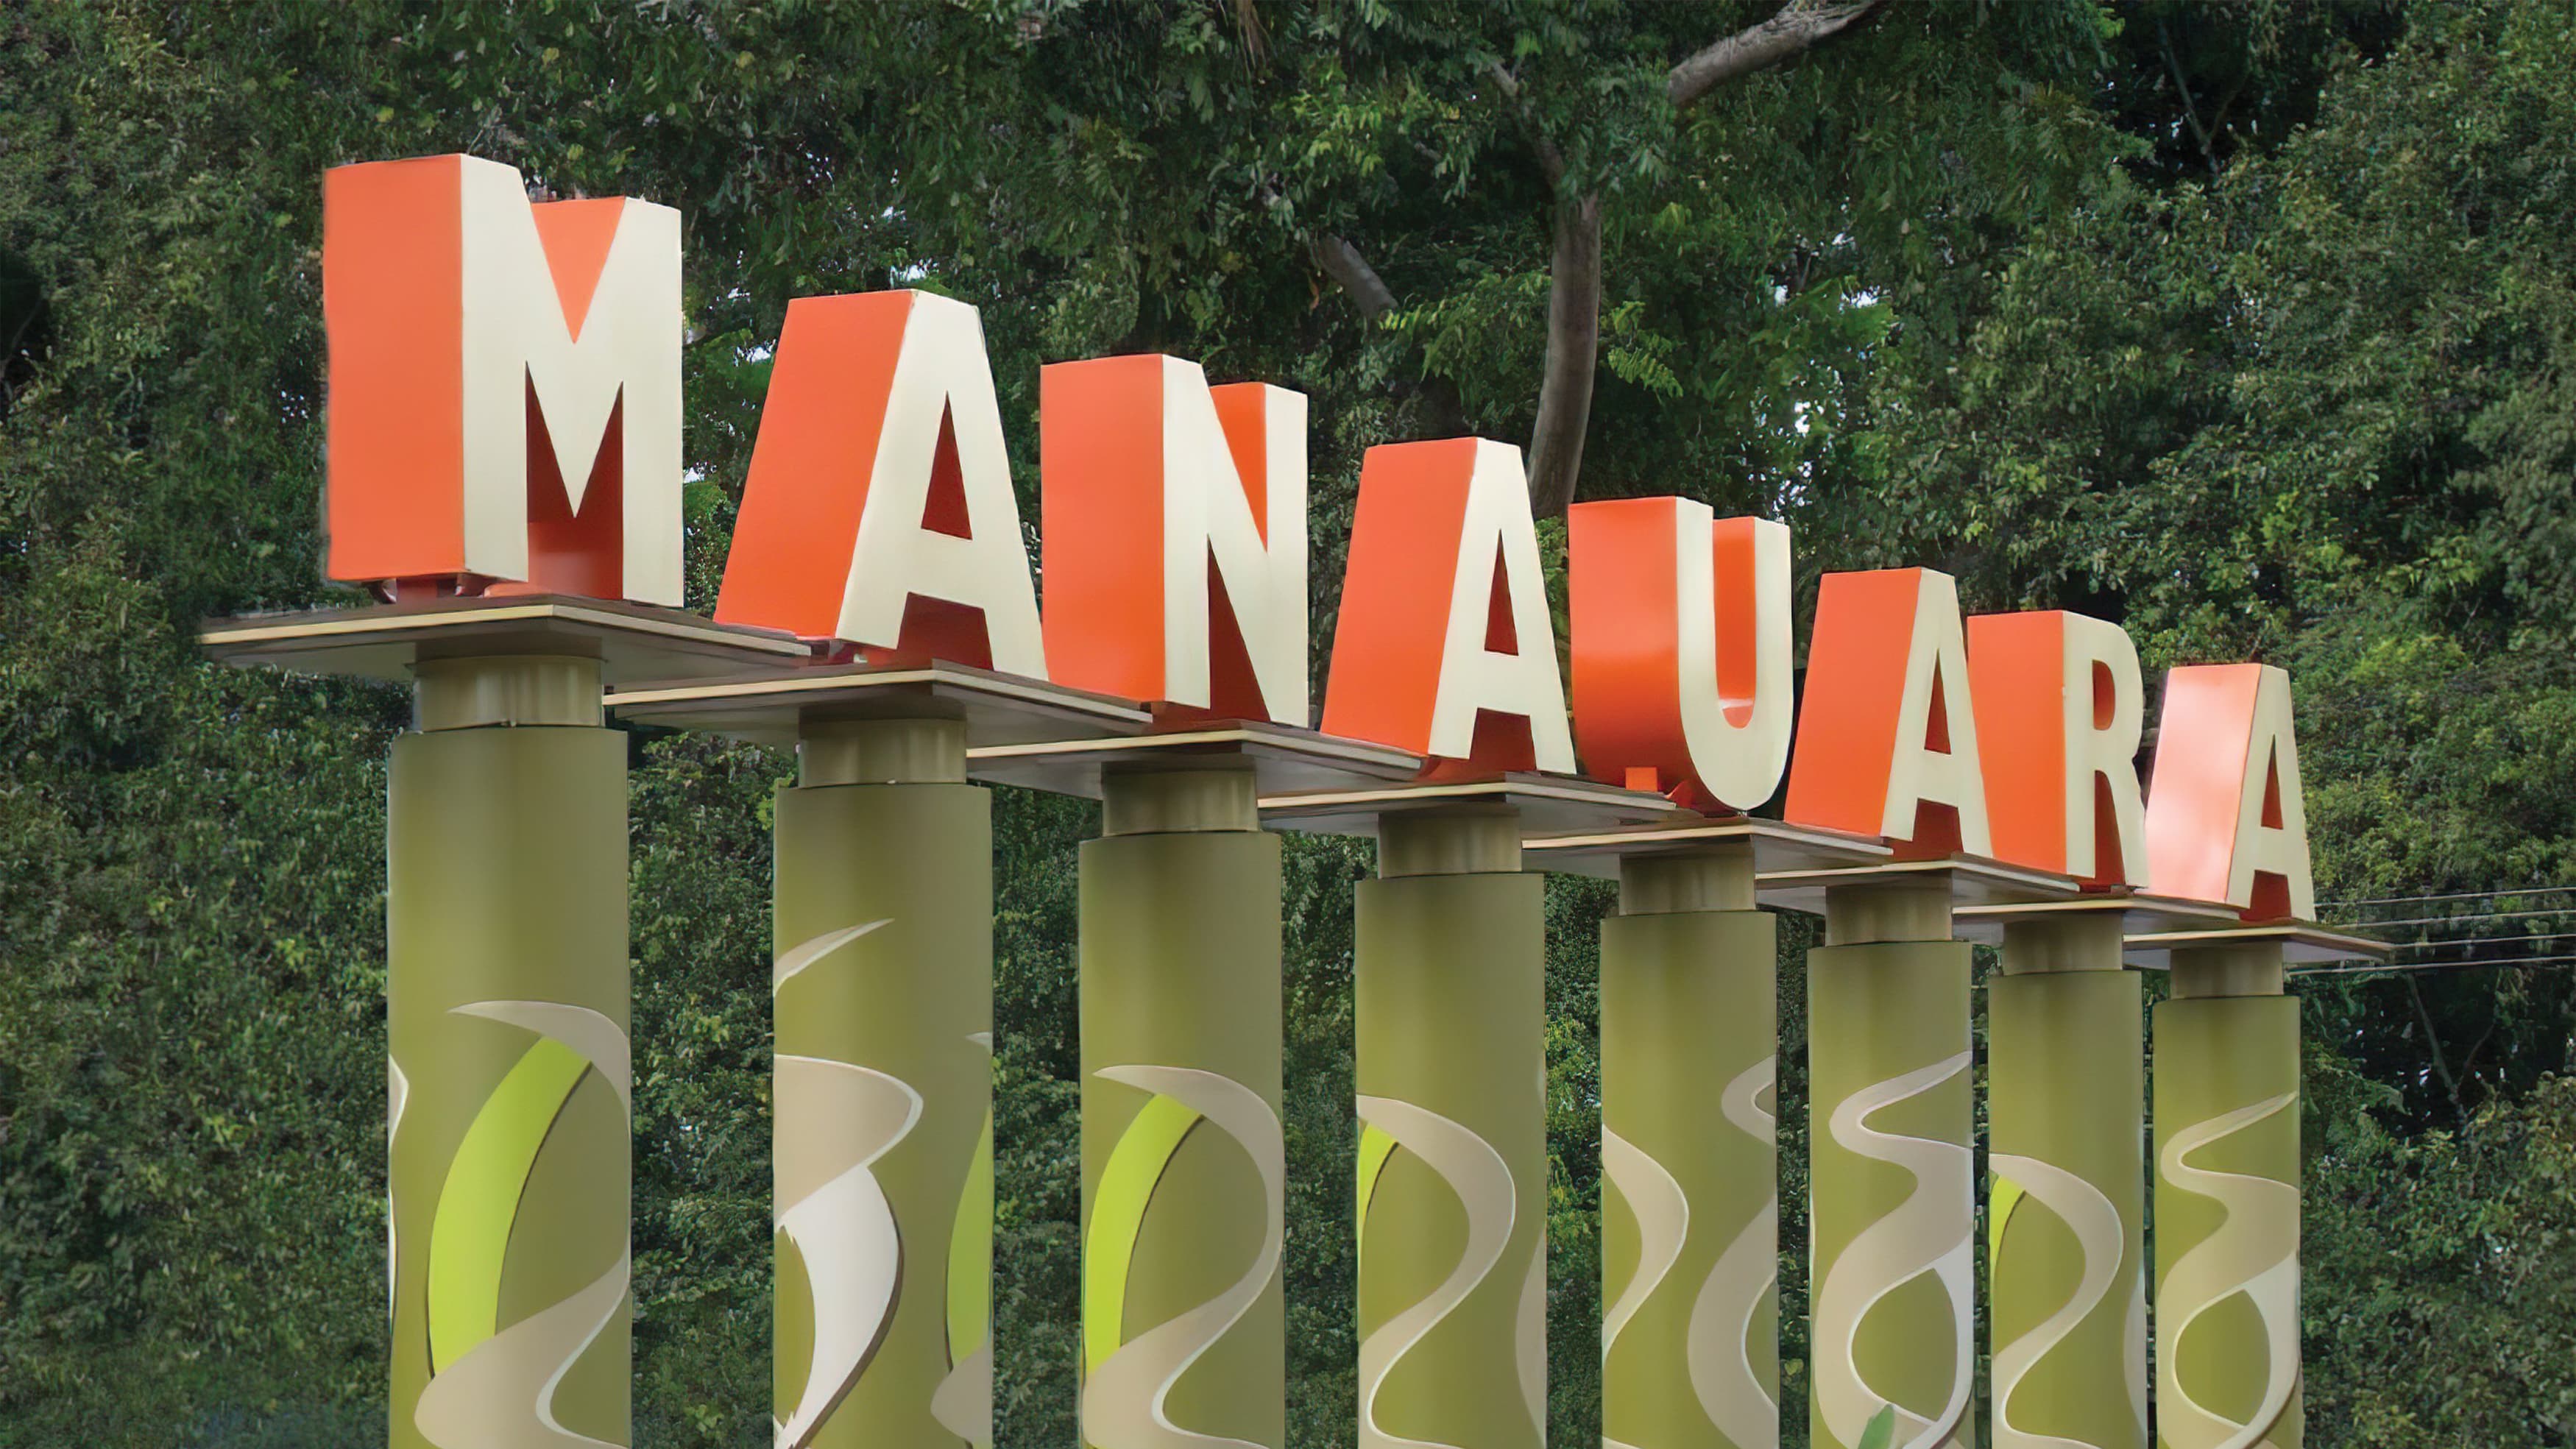 Manauara channel letters on individual pedestals integrated into landscape